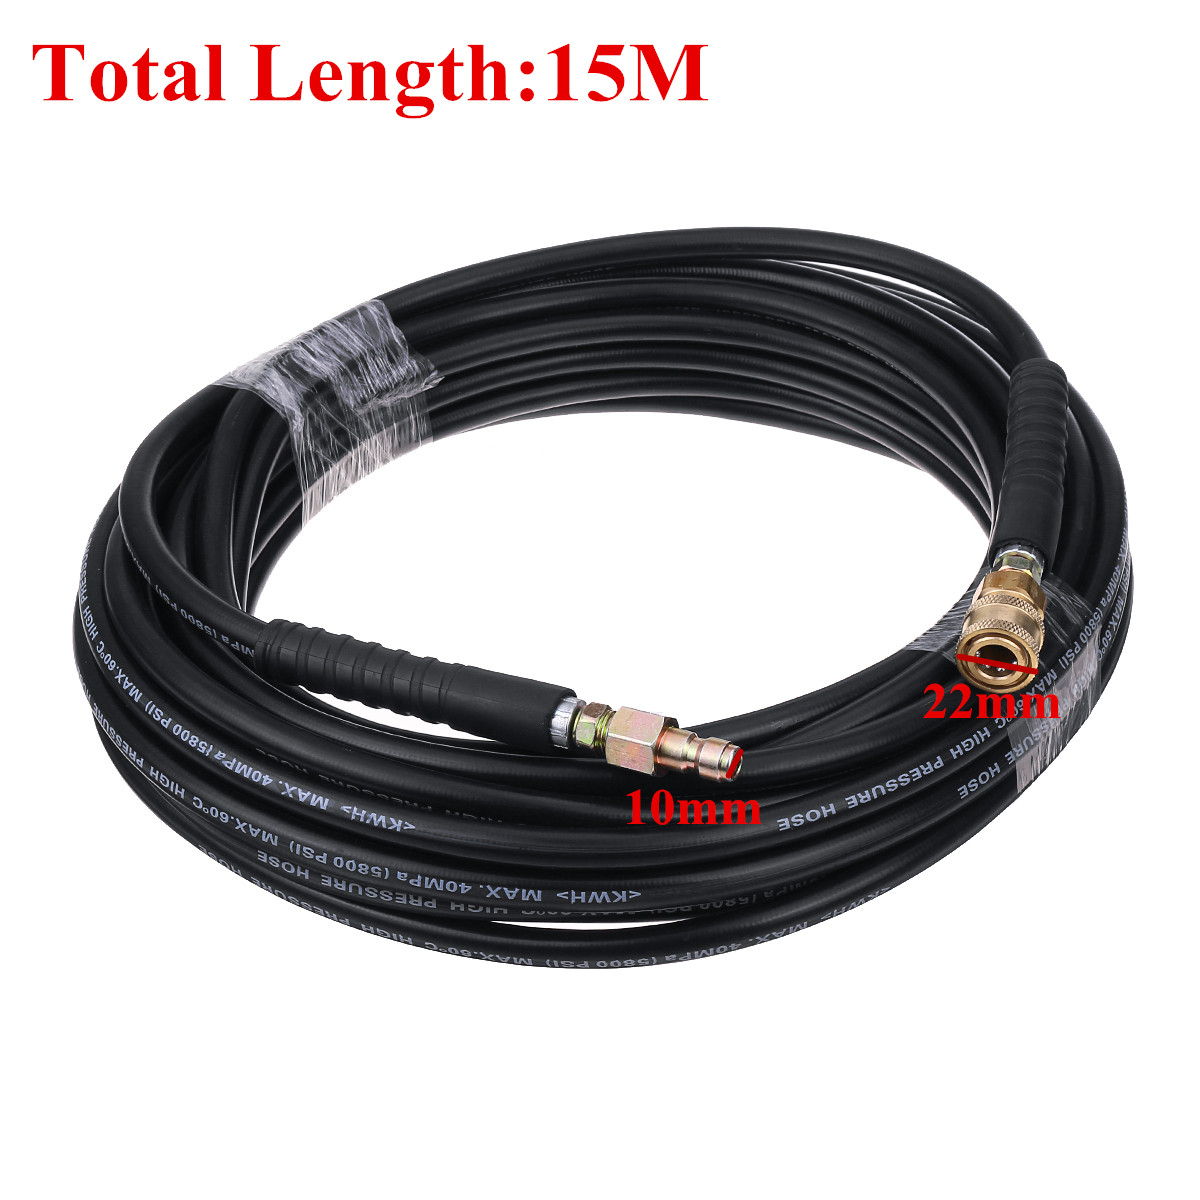 15M-40MPa-High-Pressure-Washer-Cleaning-Hose-14-Inch-Quick-Release-Couplings-Garden-Washing-Tools-Co-1570347-2